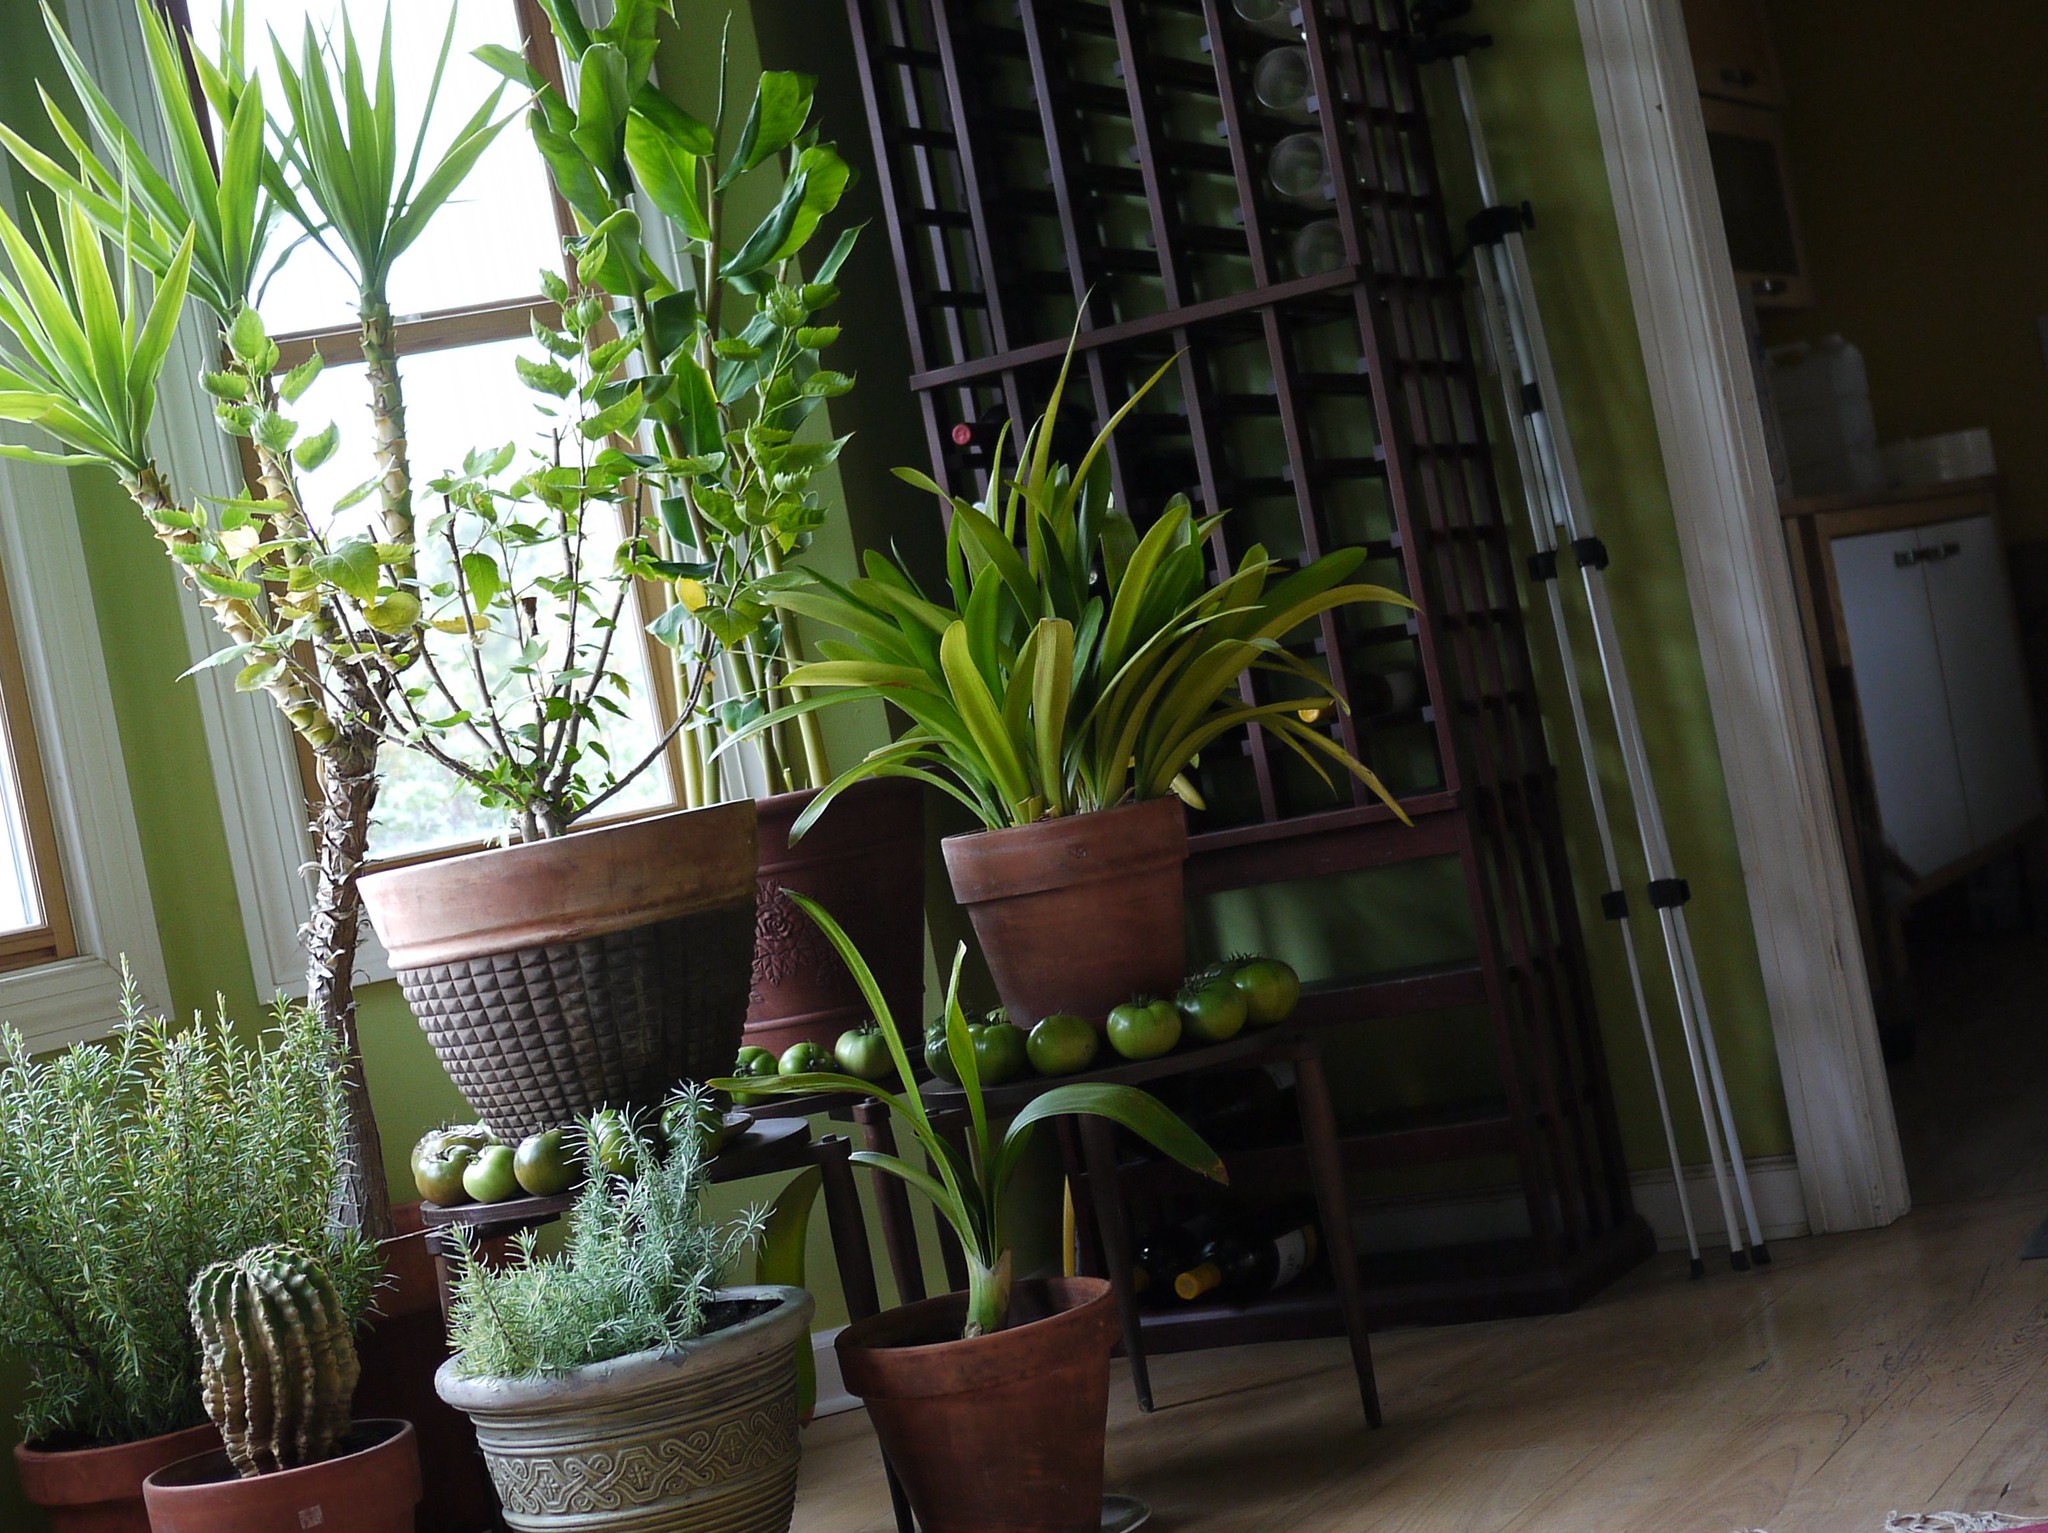 Houseplants in a grouping.